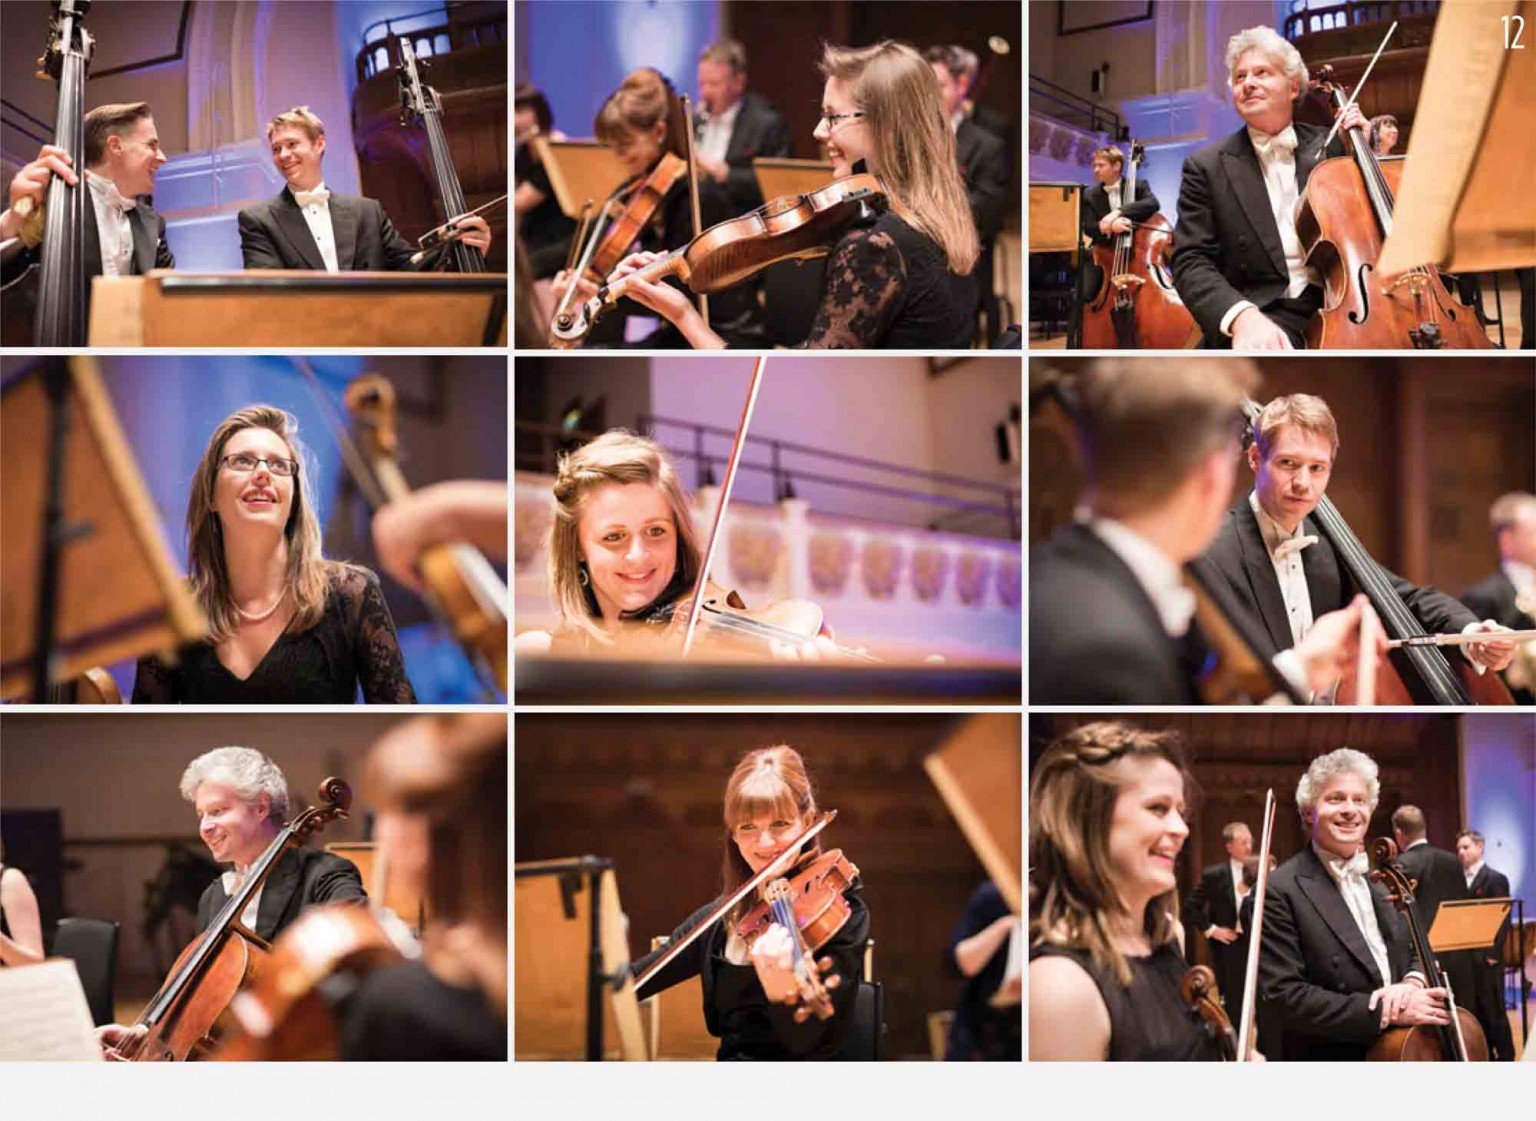 Photos of the orchestra